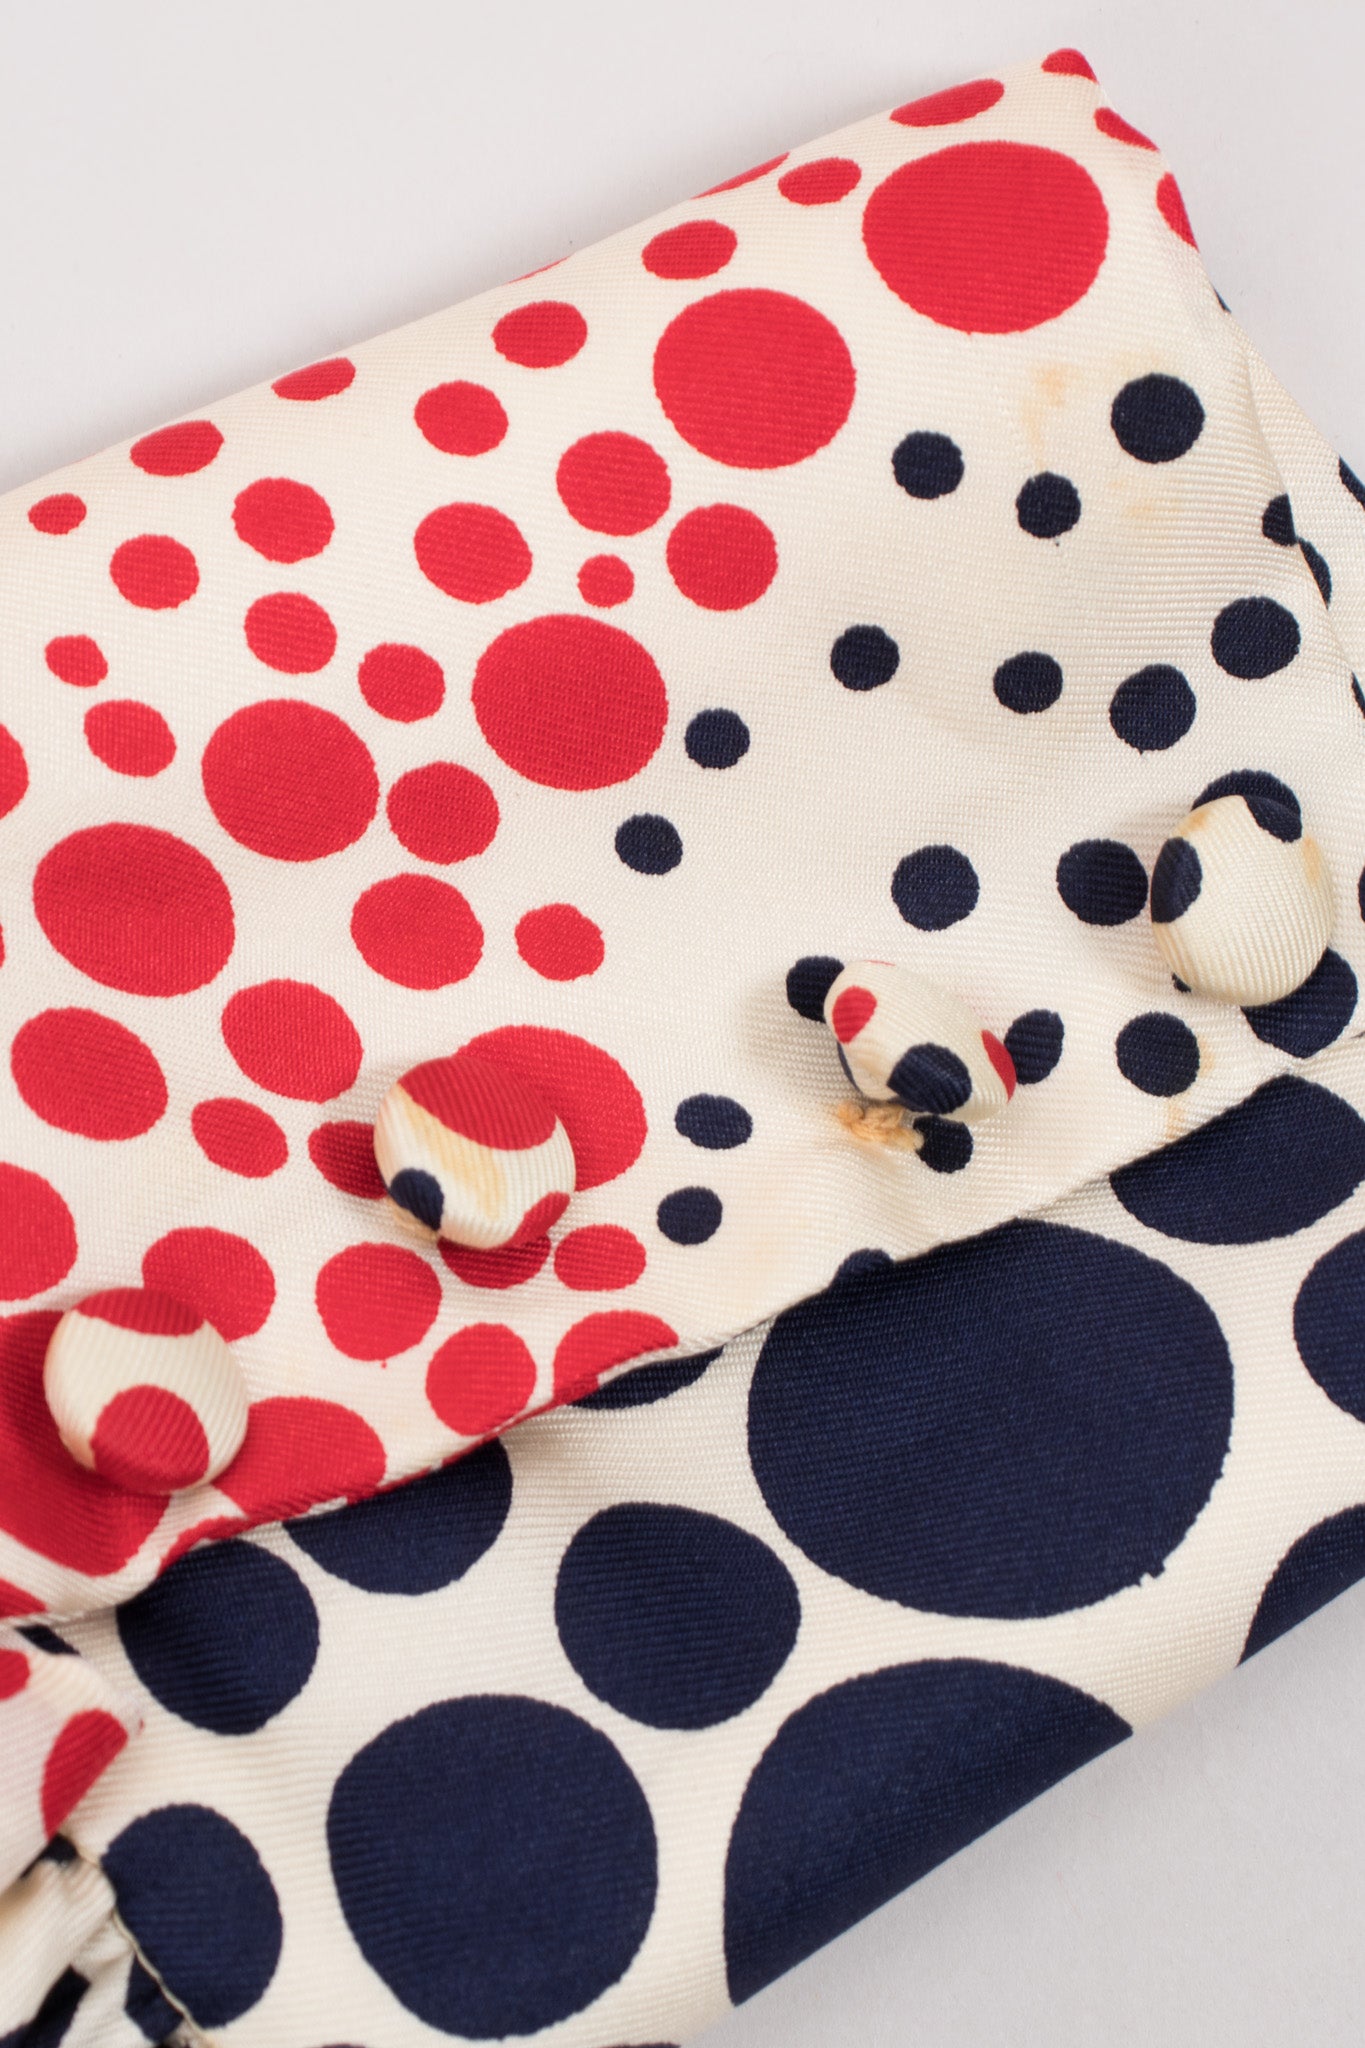 Mollie Parnis Red White Blue Independence Ribbon Dot Dress